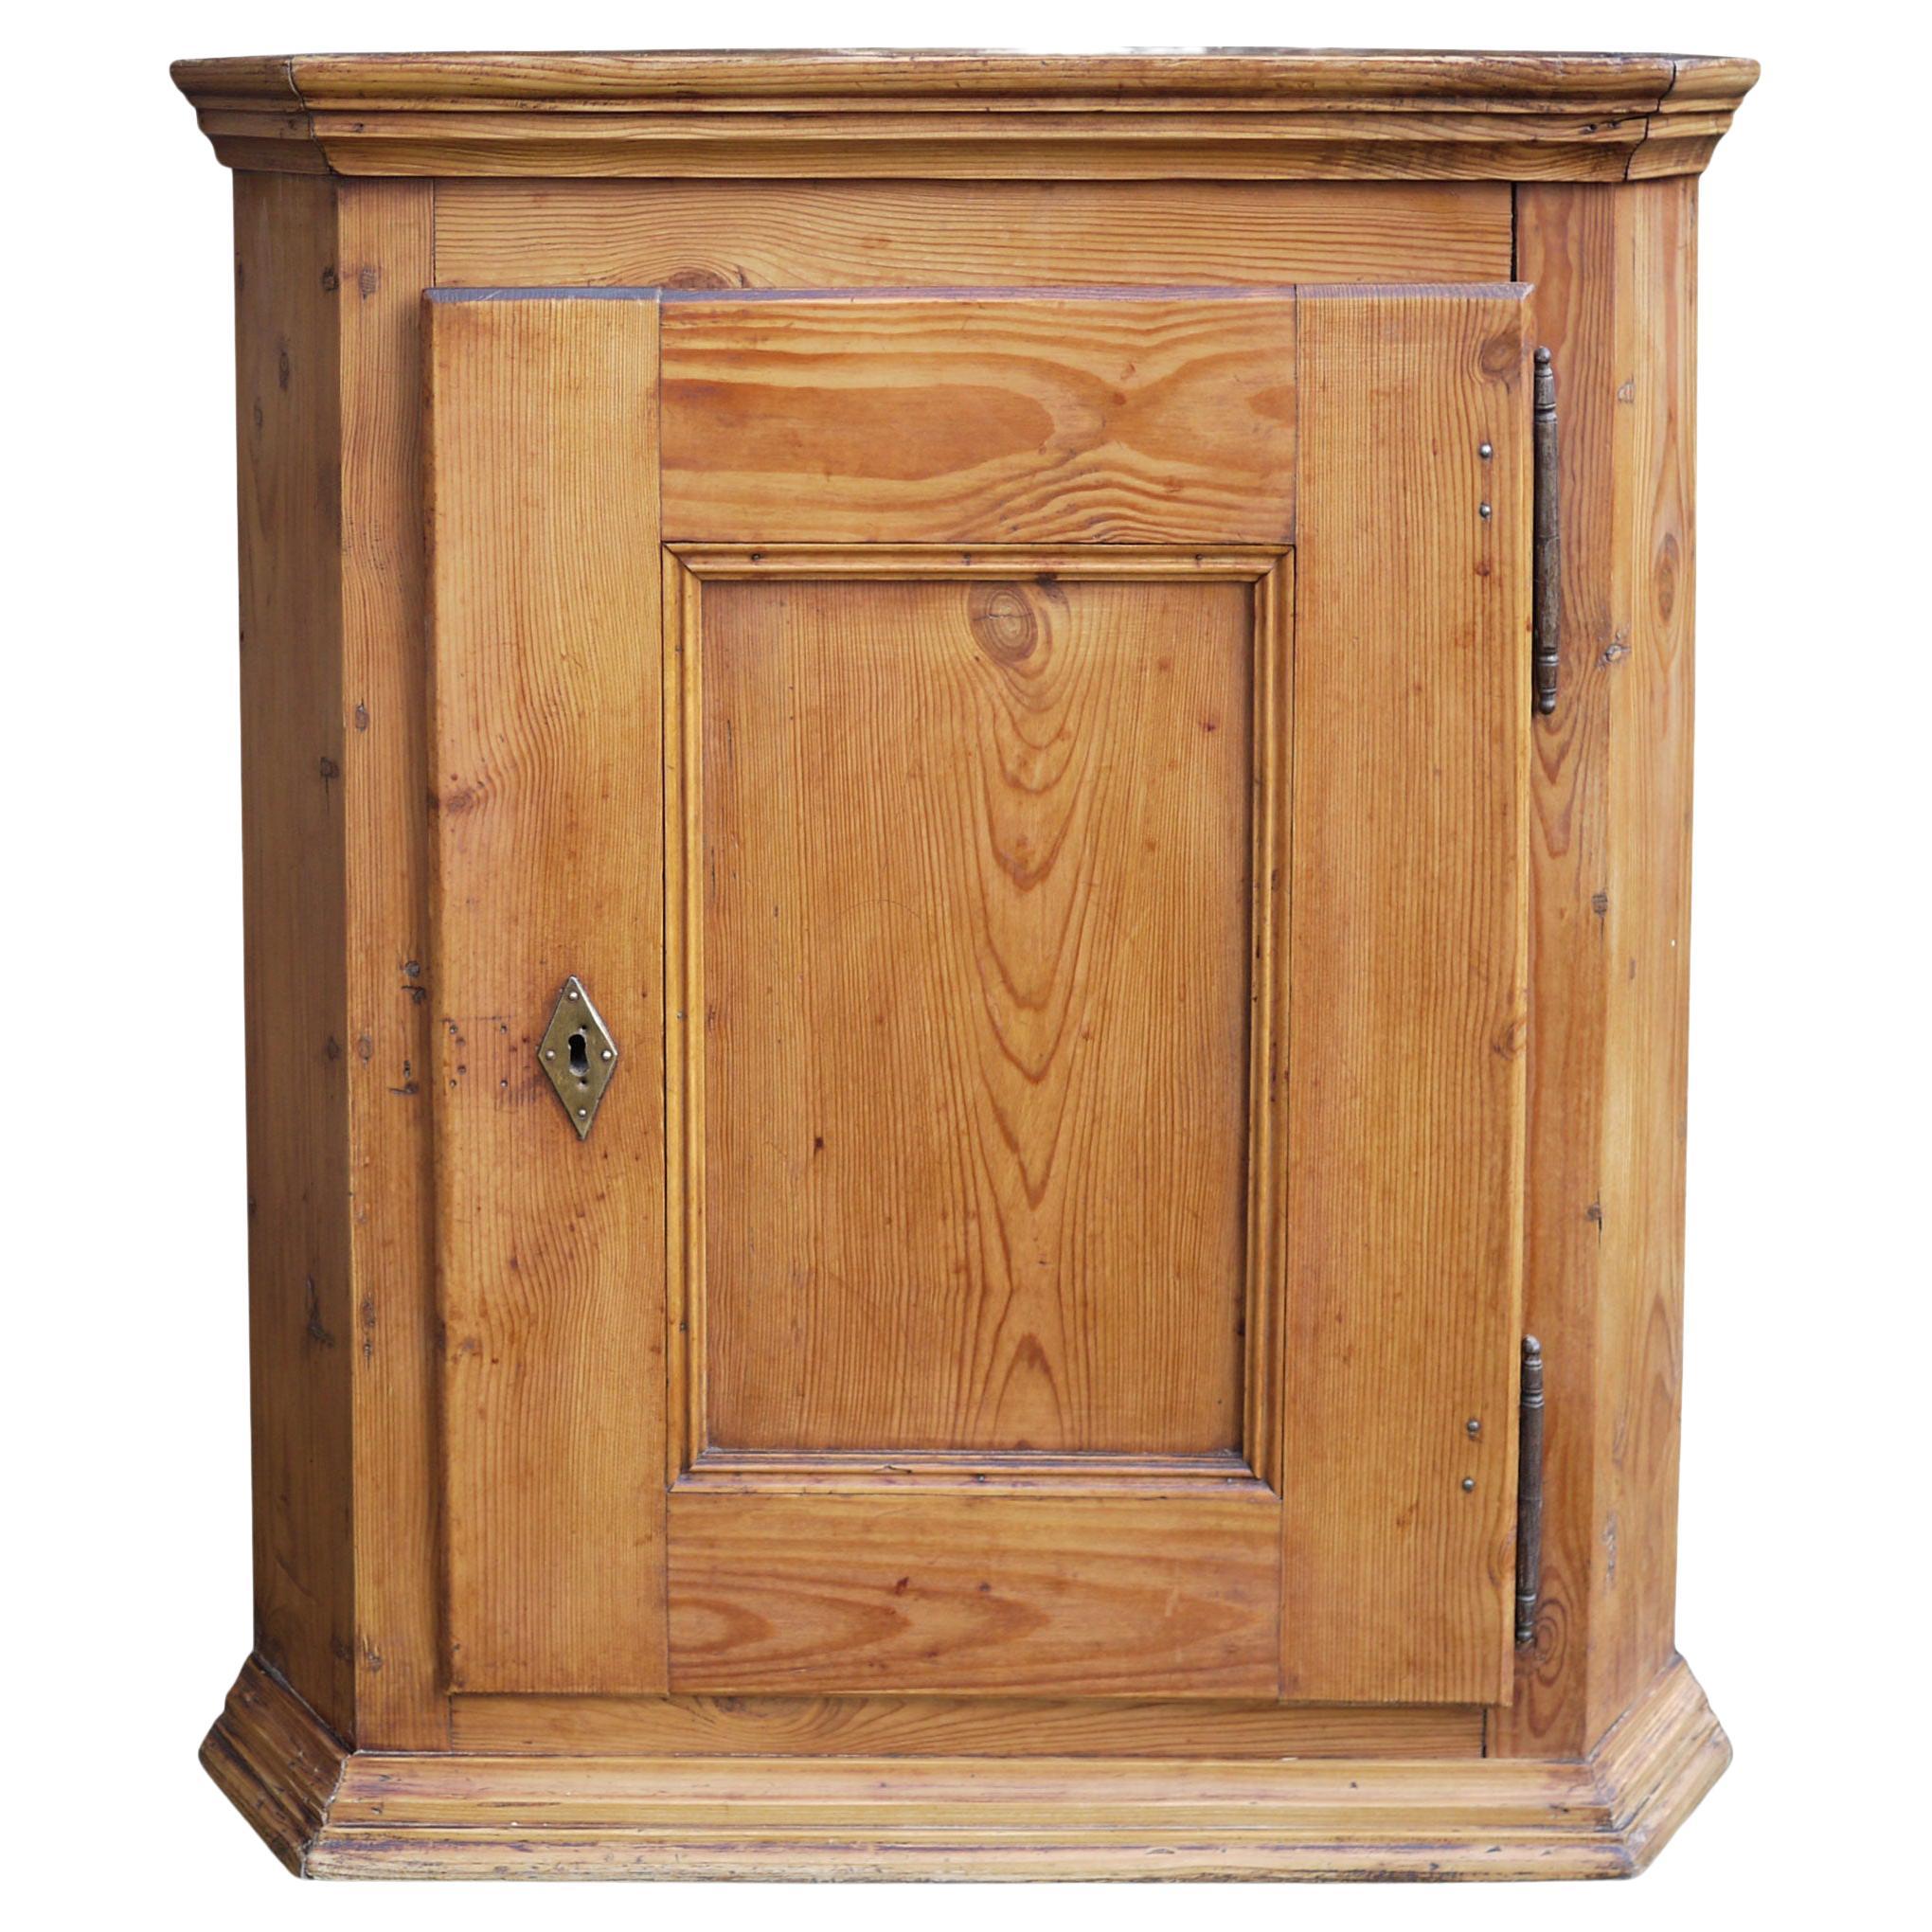 Corner Cabinet in Fir Wood, Italy 1810